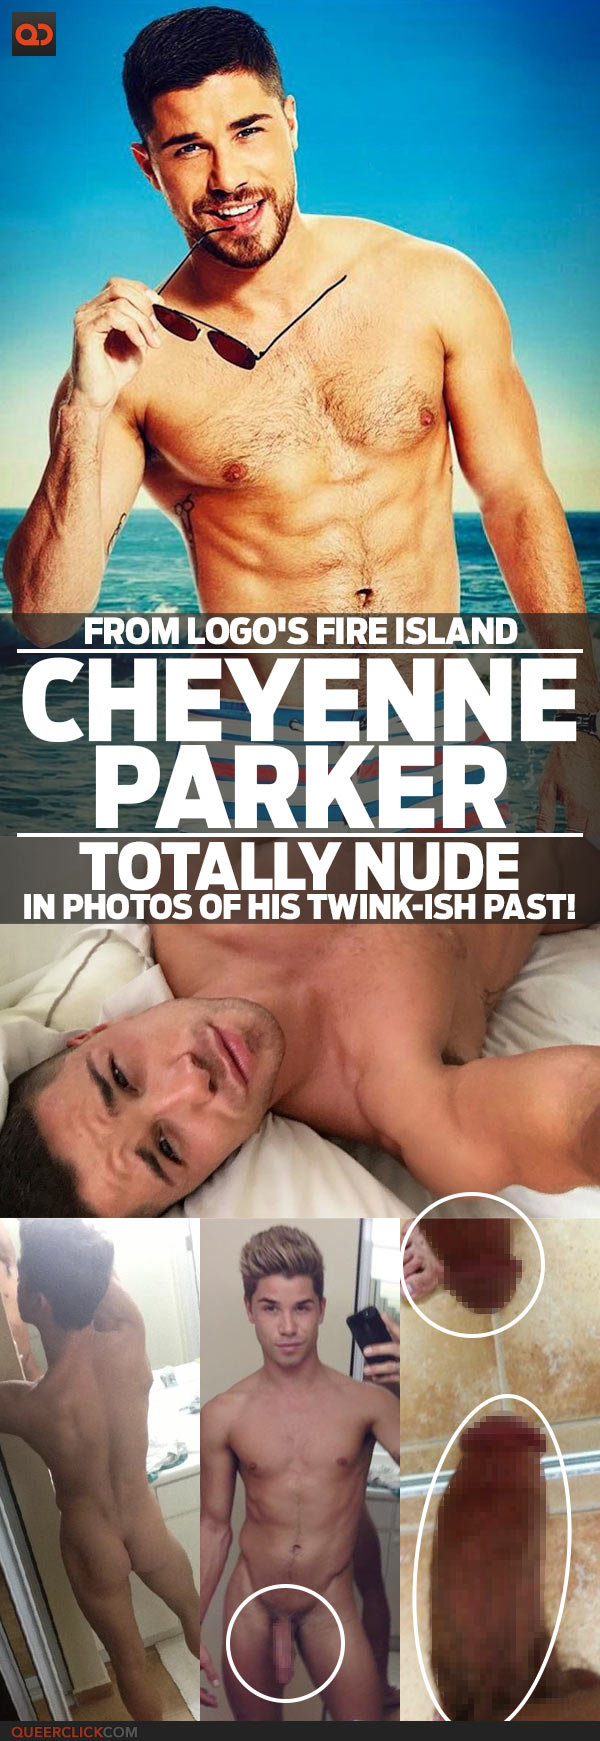 Cheyenne Parker, From Logo's Fire Island, Totally Nude In Photos Of His Twink-Ish Past!